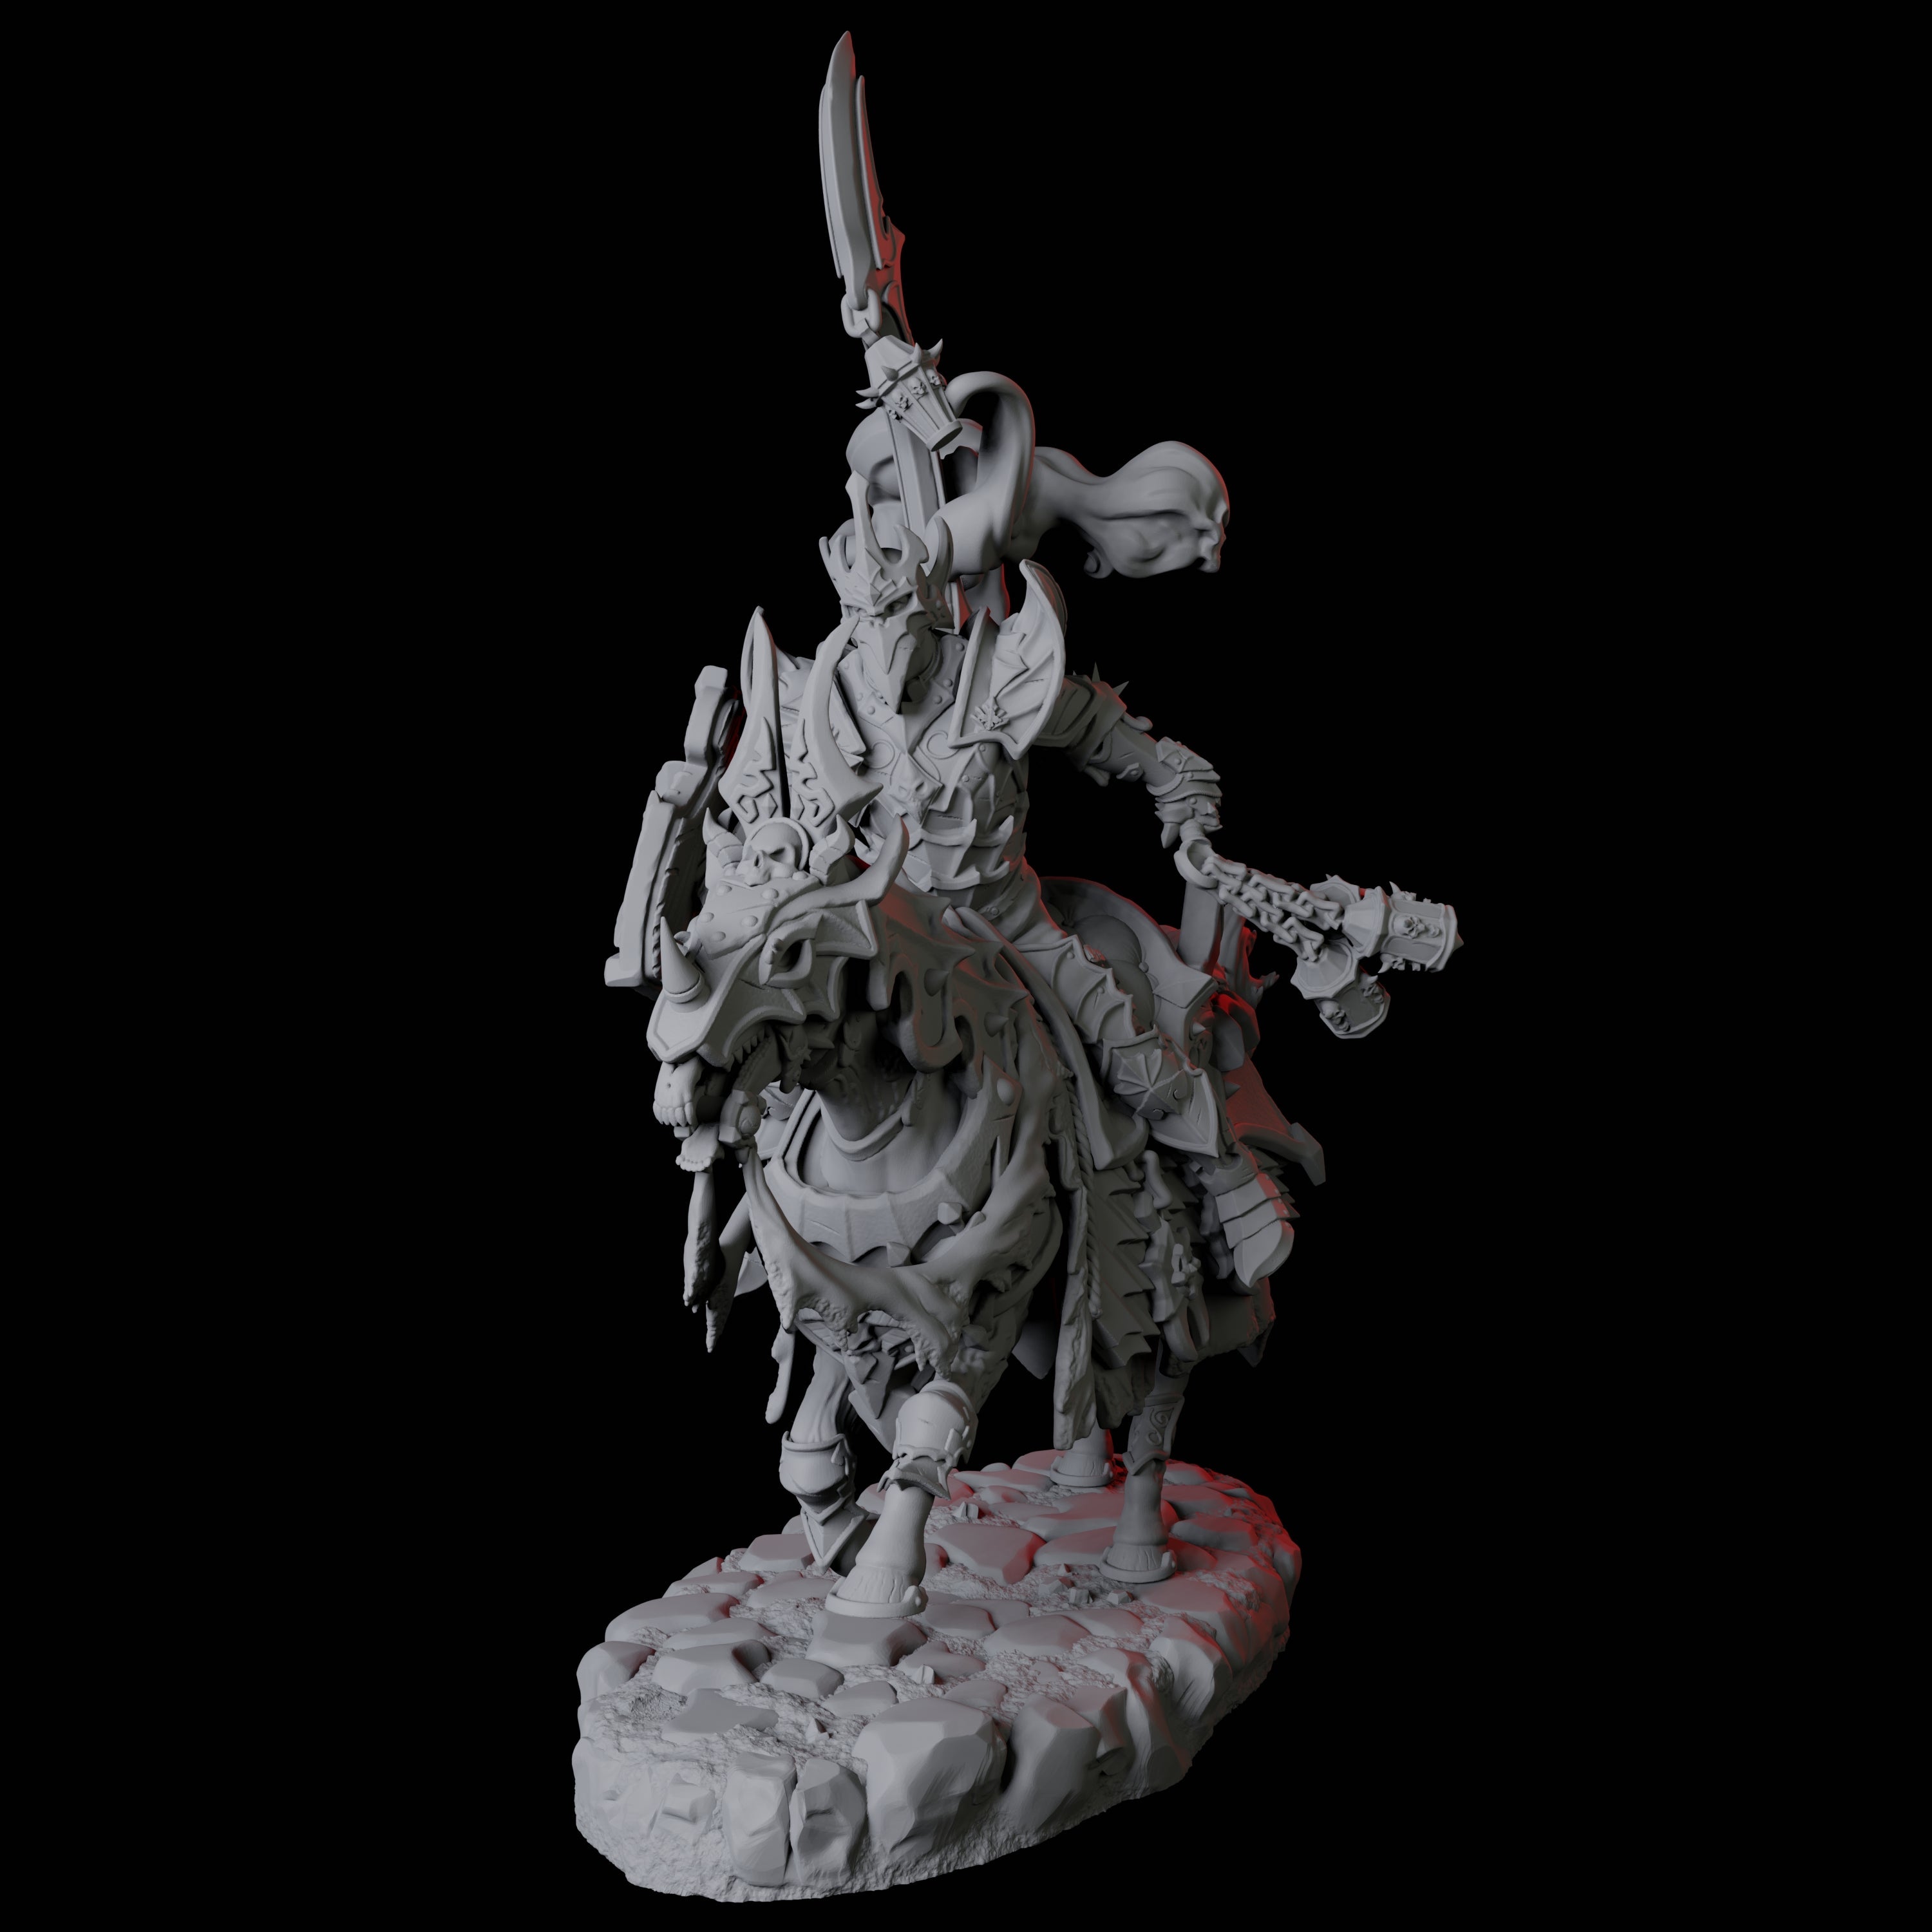 Four Stalking Mounted Revenants Miniature for Dungeons and Dragons, Pathfinder or other TTRPGs